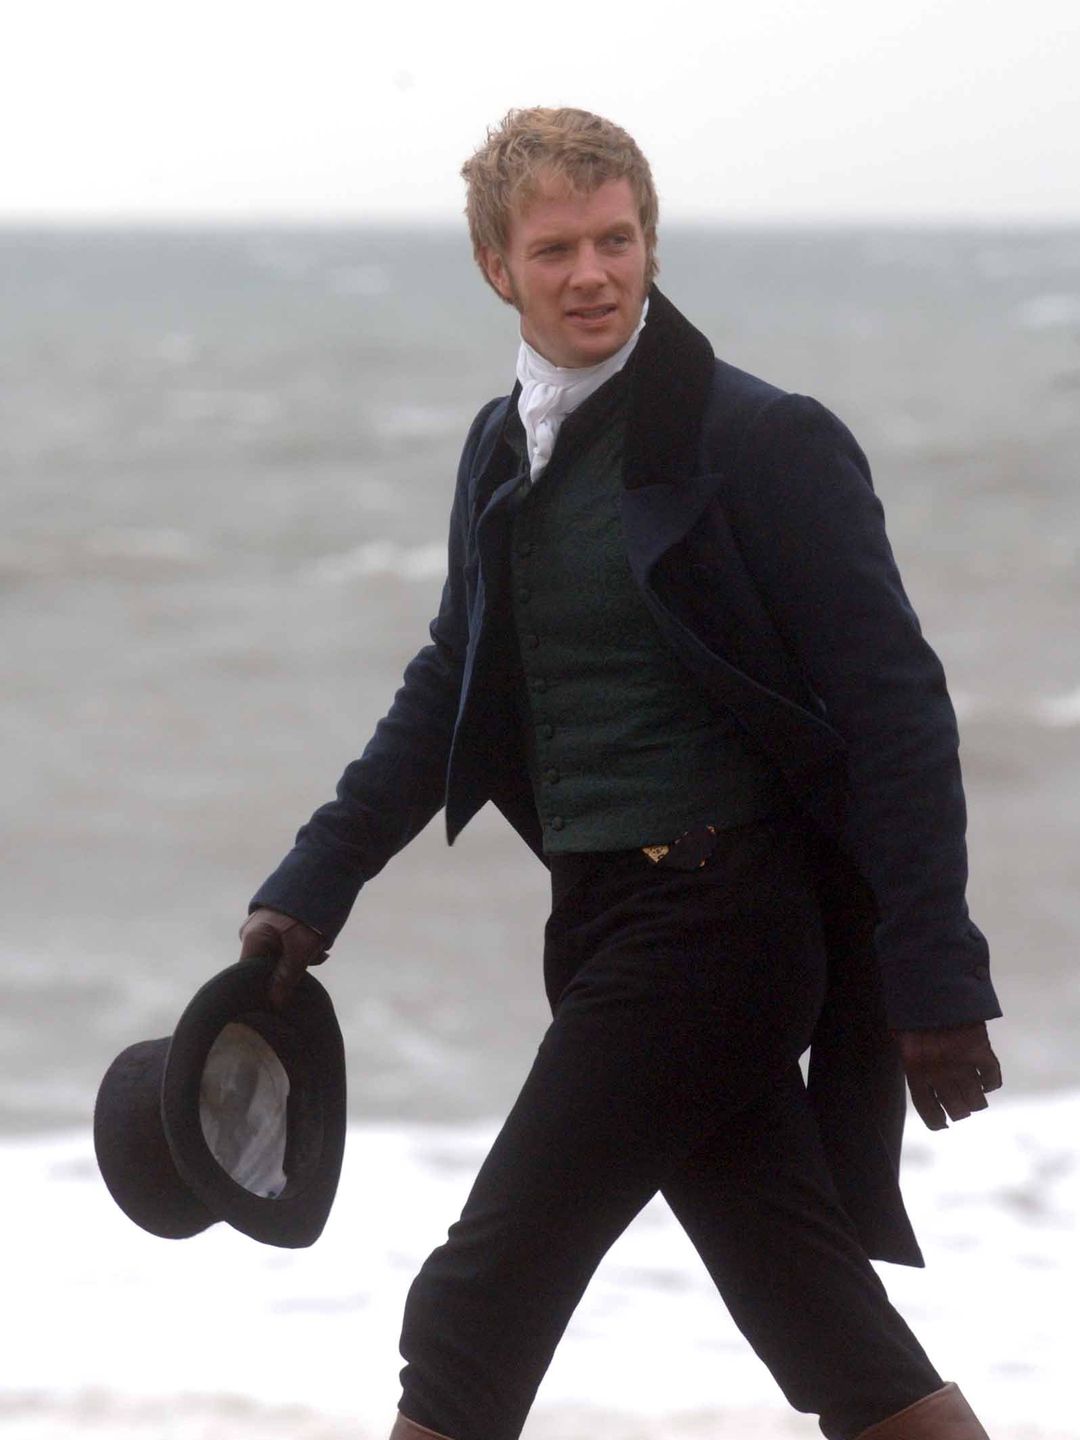 Rupert Penry-Jones as Captain Frederick Wentworth in ITV's adaptation of Persuasion